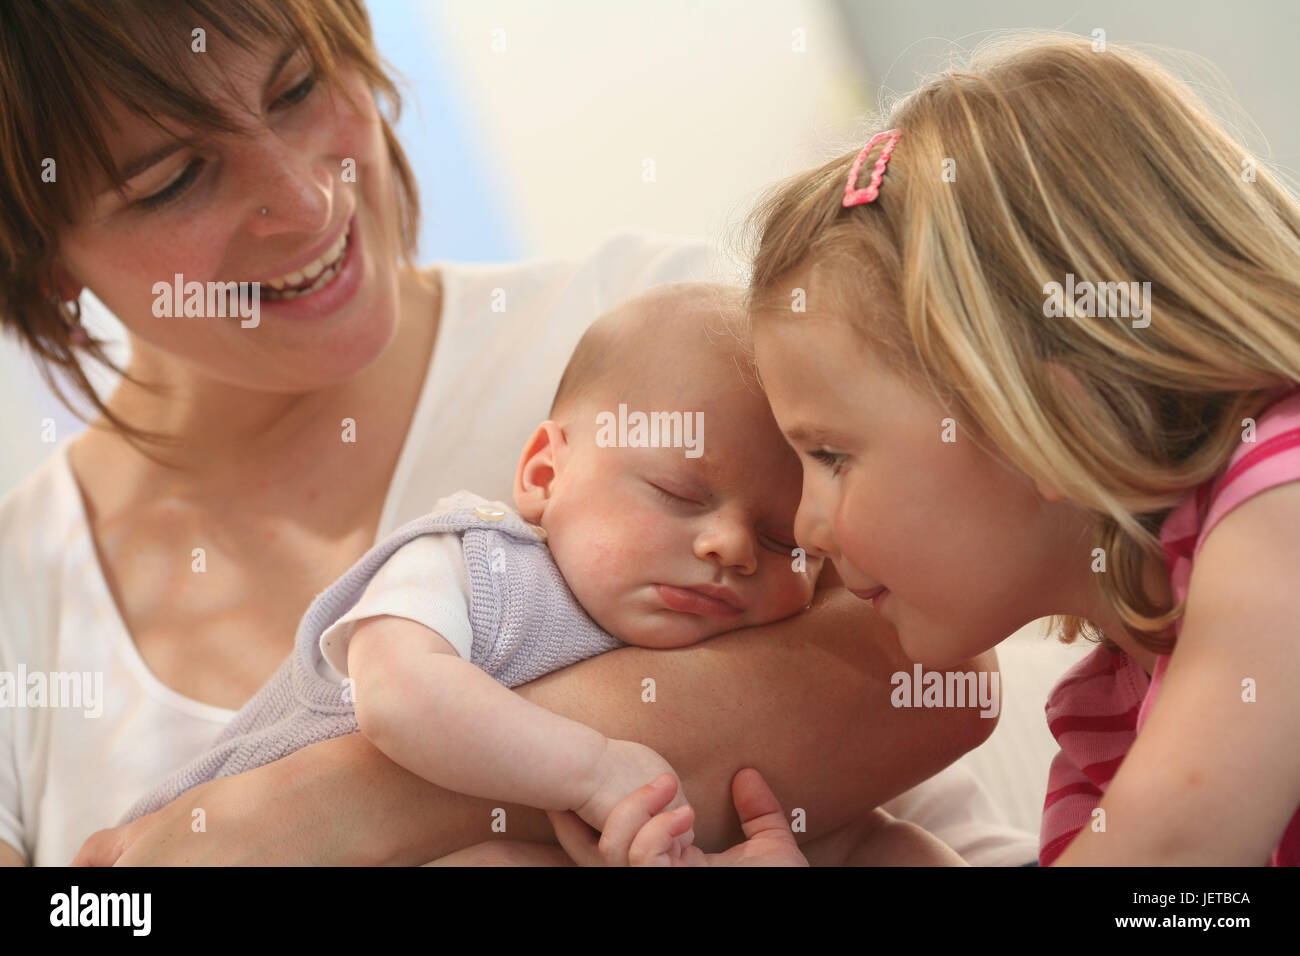 Family, mother, baby, 3 months, infant, 3 years, touch, sibling love, Stock Photo